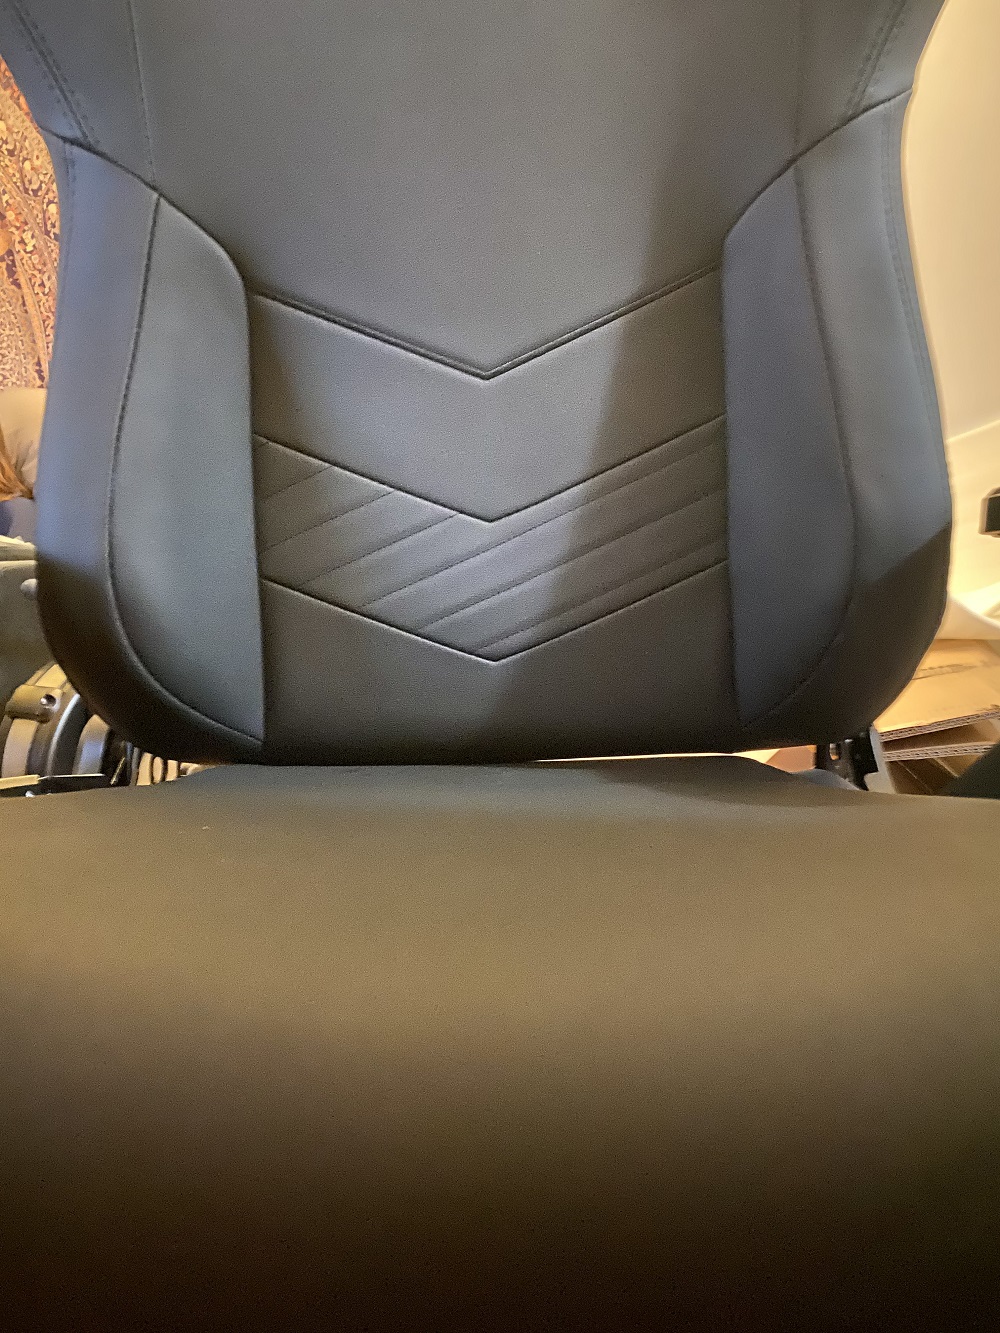 Back of chair is not straight when attached